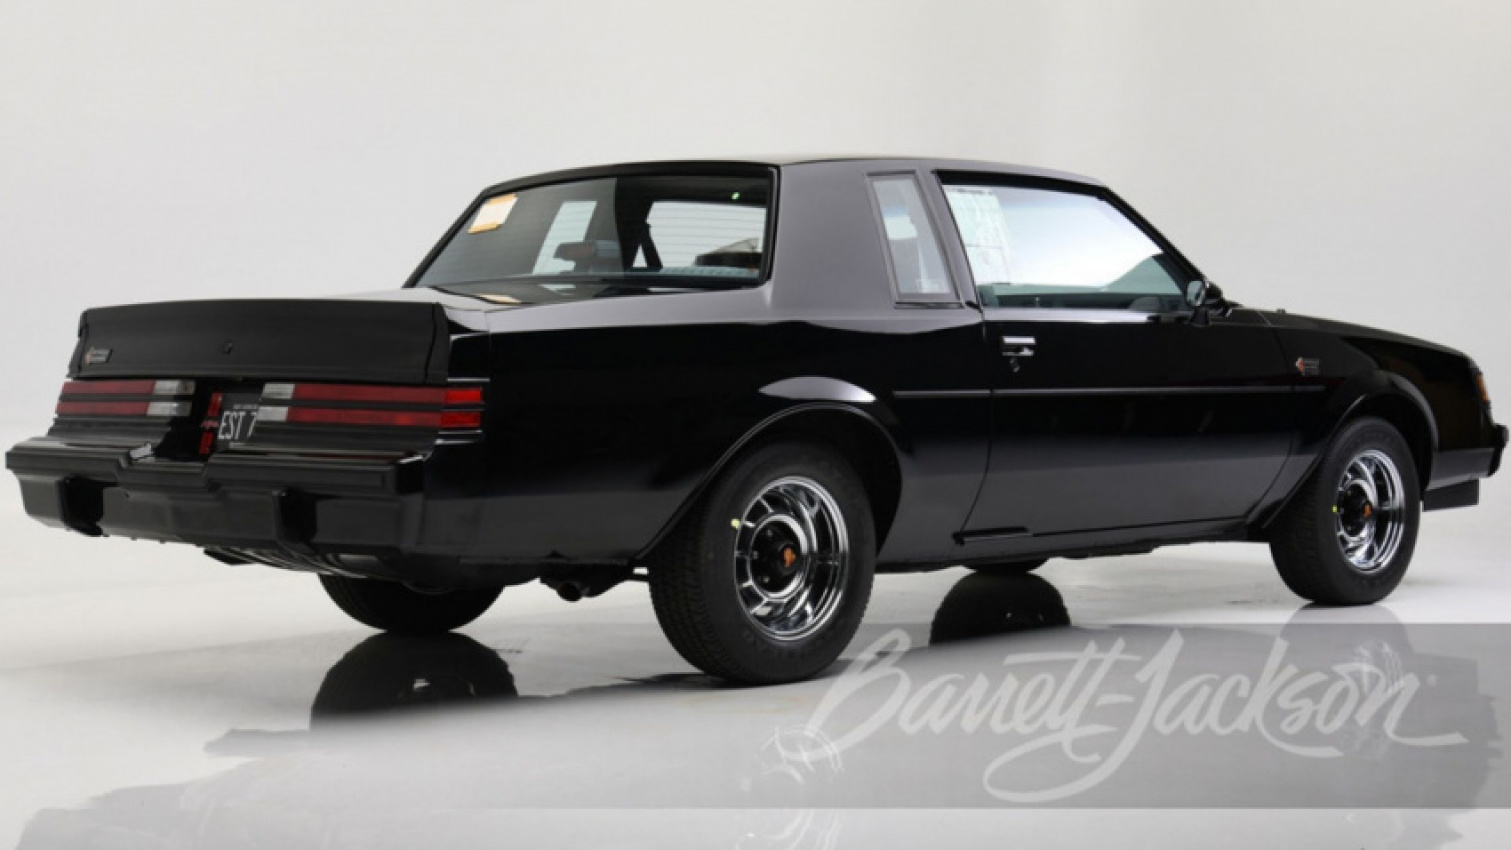 autos, buick, cars, american, asian, celebrity, classic, client, europe, exotic, features, handpicked, luxury, modern classic, muscle, news, newsletter, off road, sports, trucks, last buick grand national sells for $550,000